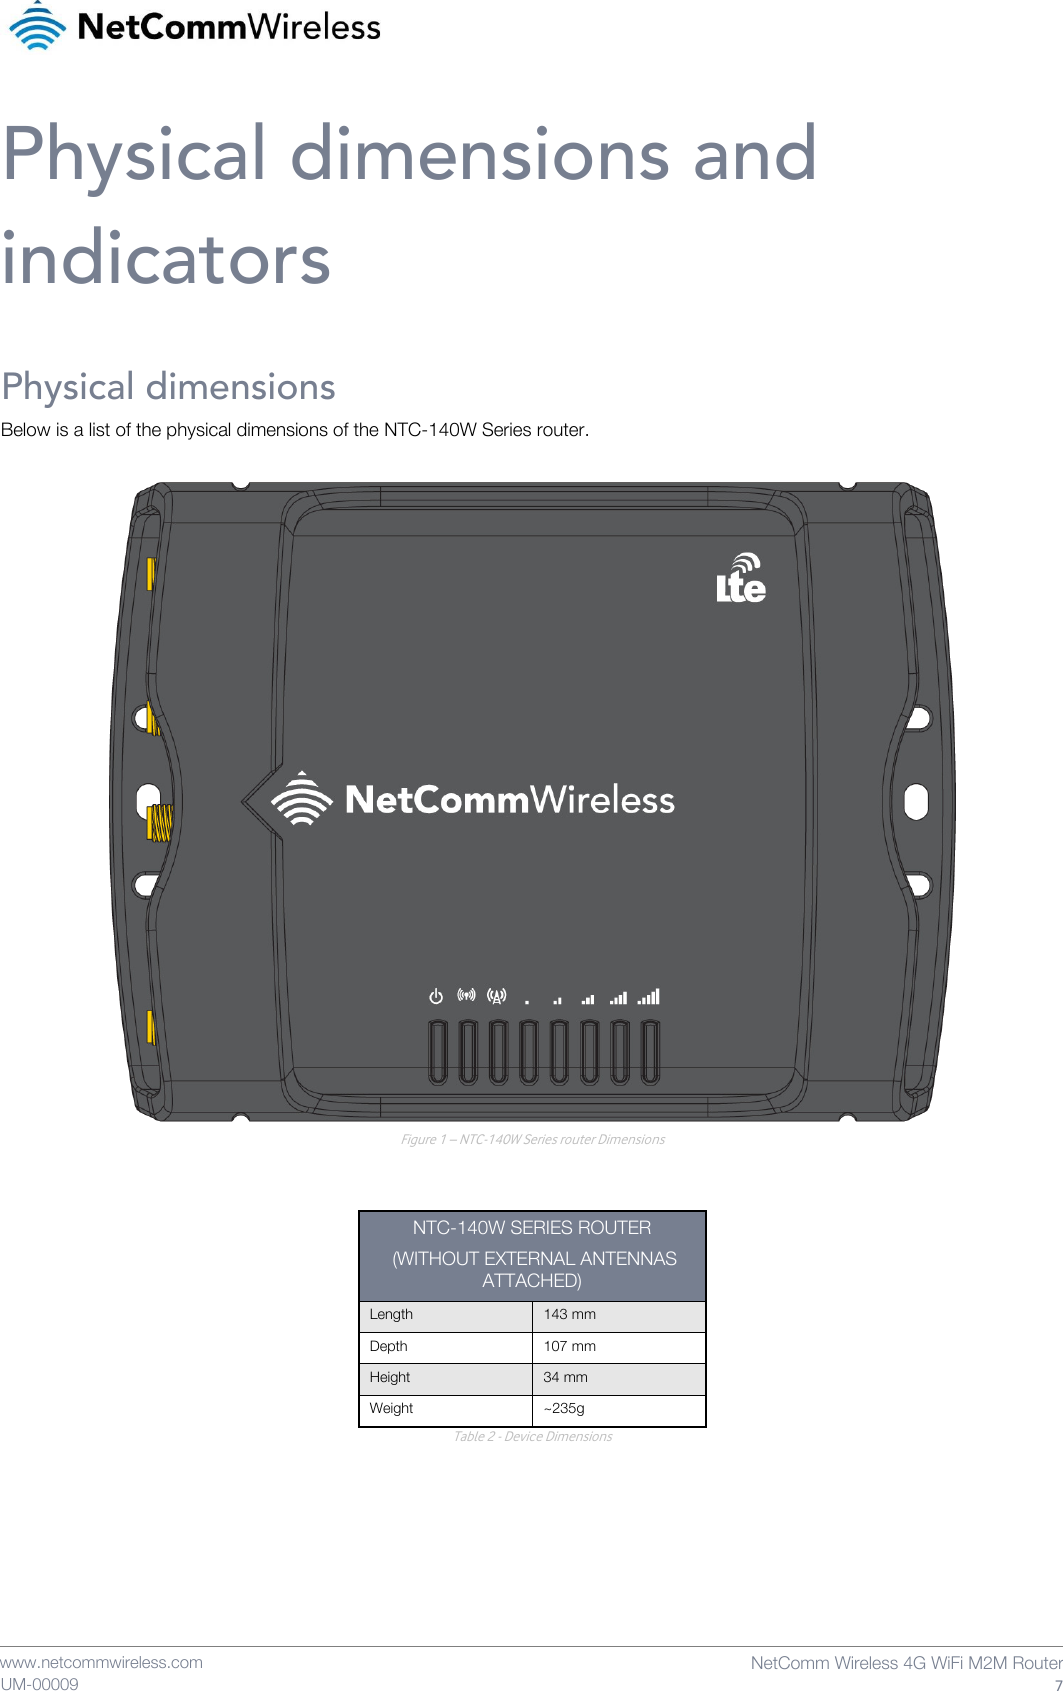    www.netcommwireless.com NetComm Wireless 4G WiFi M2M Router 7 UM-00009 Physical dimensions and indicators Physical dimensions Below is a list of the physical dimensions of the NTC-140W Series router.   Figure 1 – NTC-140W Series router Dimensions   NTC-140W SERIES ROUTER  (WITHOUT EXTERNAL ANTENNAS ATTACHED) Length 143 mm Depth 107 mm Height 34 mm Weight ~235g Table 2 - Device Dimensions   